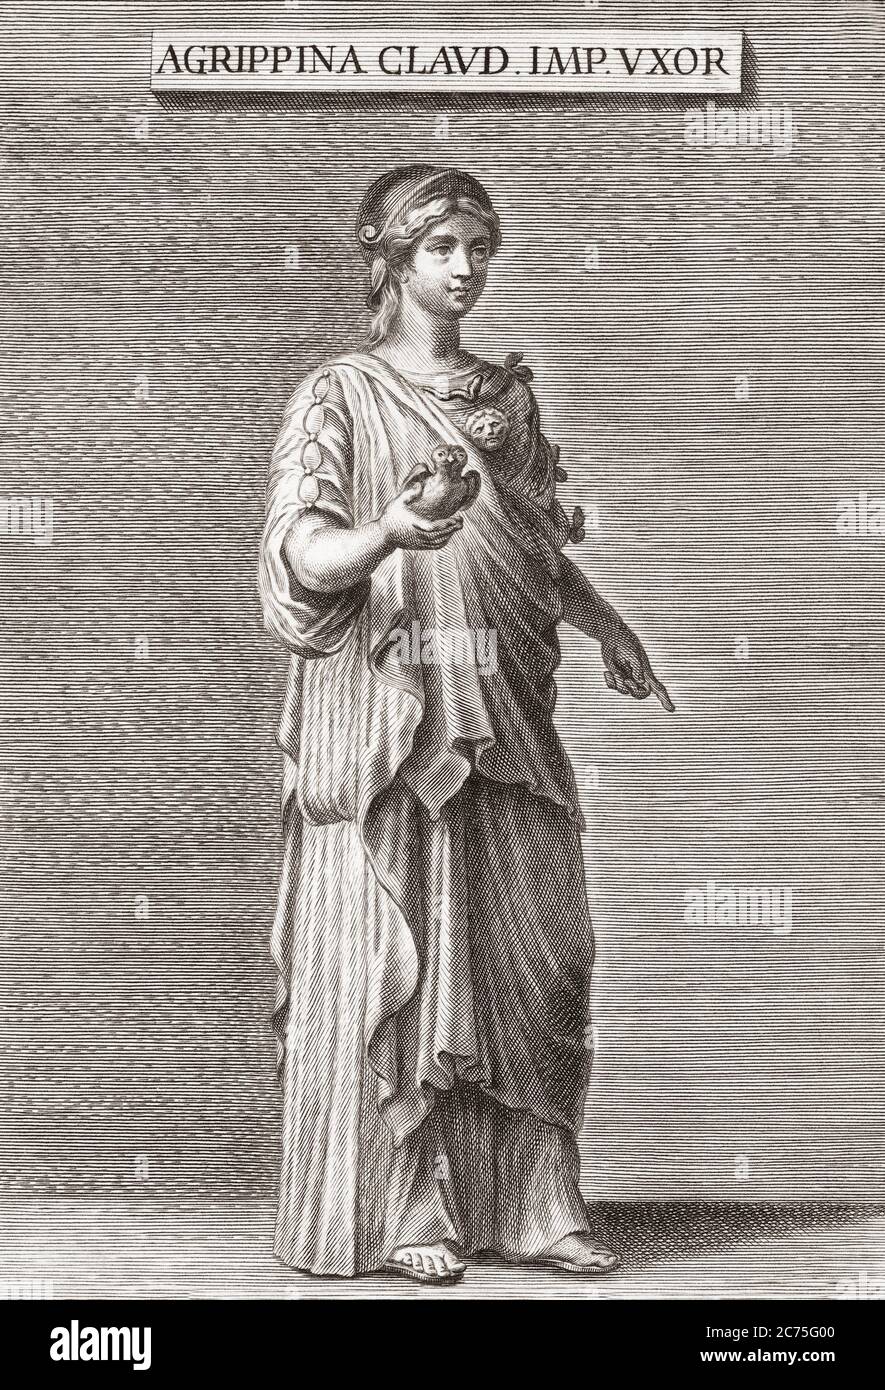 Julia Agrippina, often referred to as Agrippina the Younger, AD 15 - AD 59.  Empress of the Roman Empire. Stock Photo